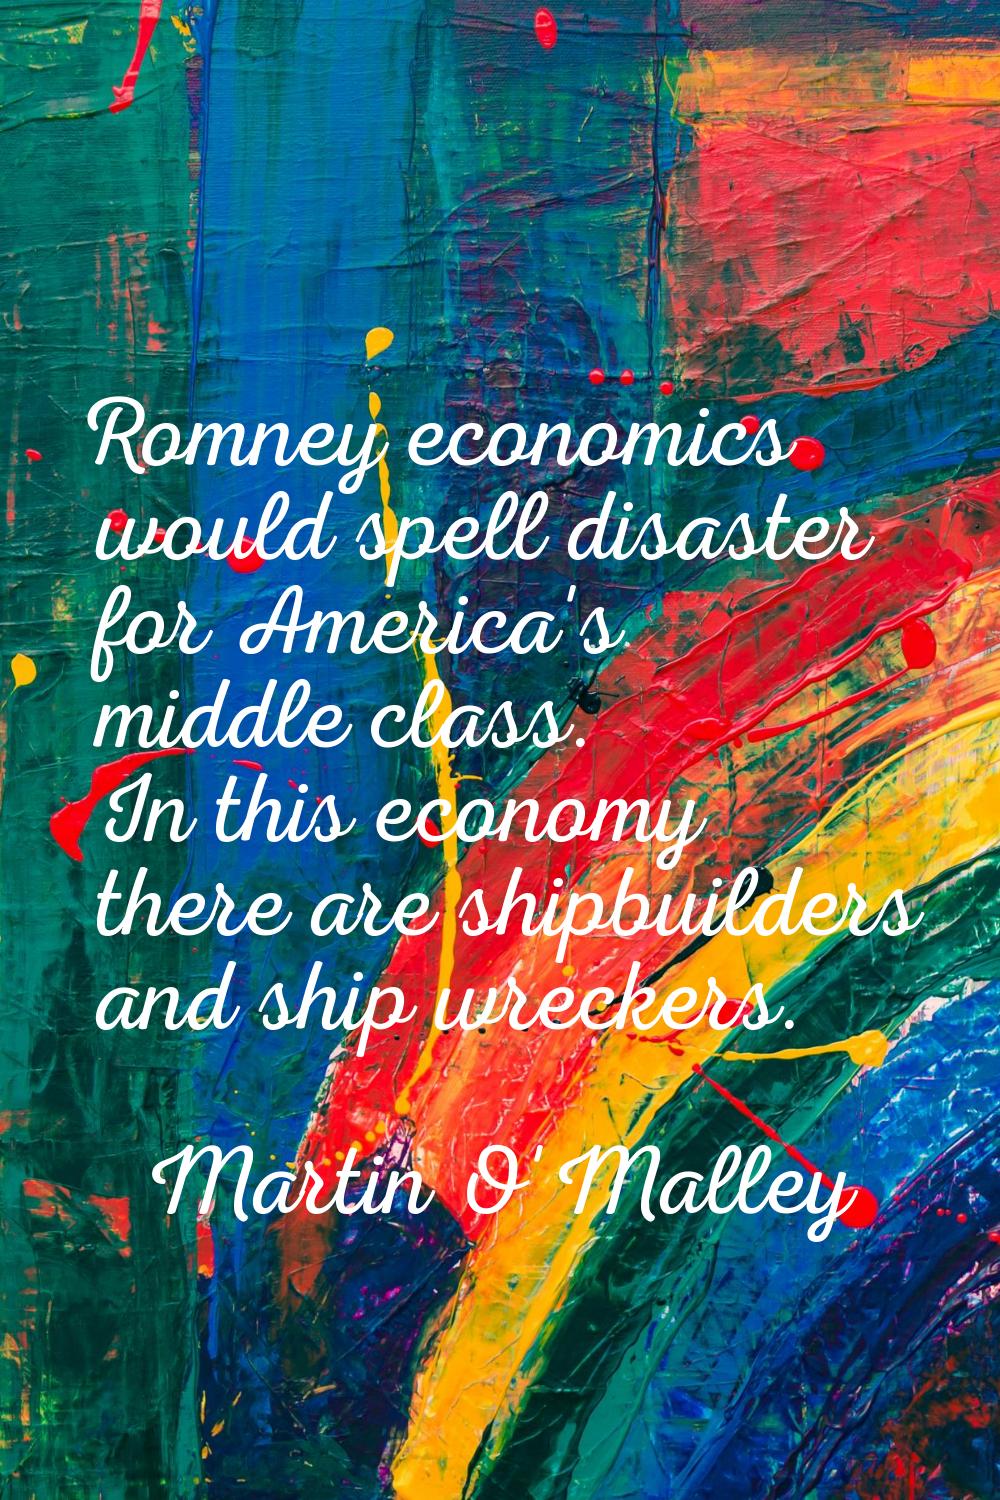 Romney economics would spell disaster for America's middle class. In this economy there are shipbui